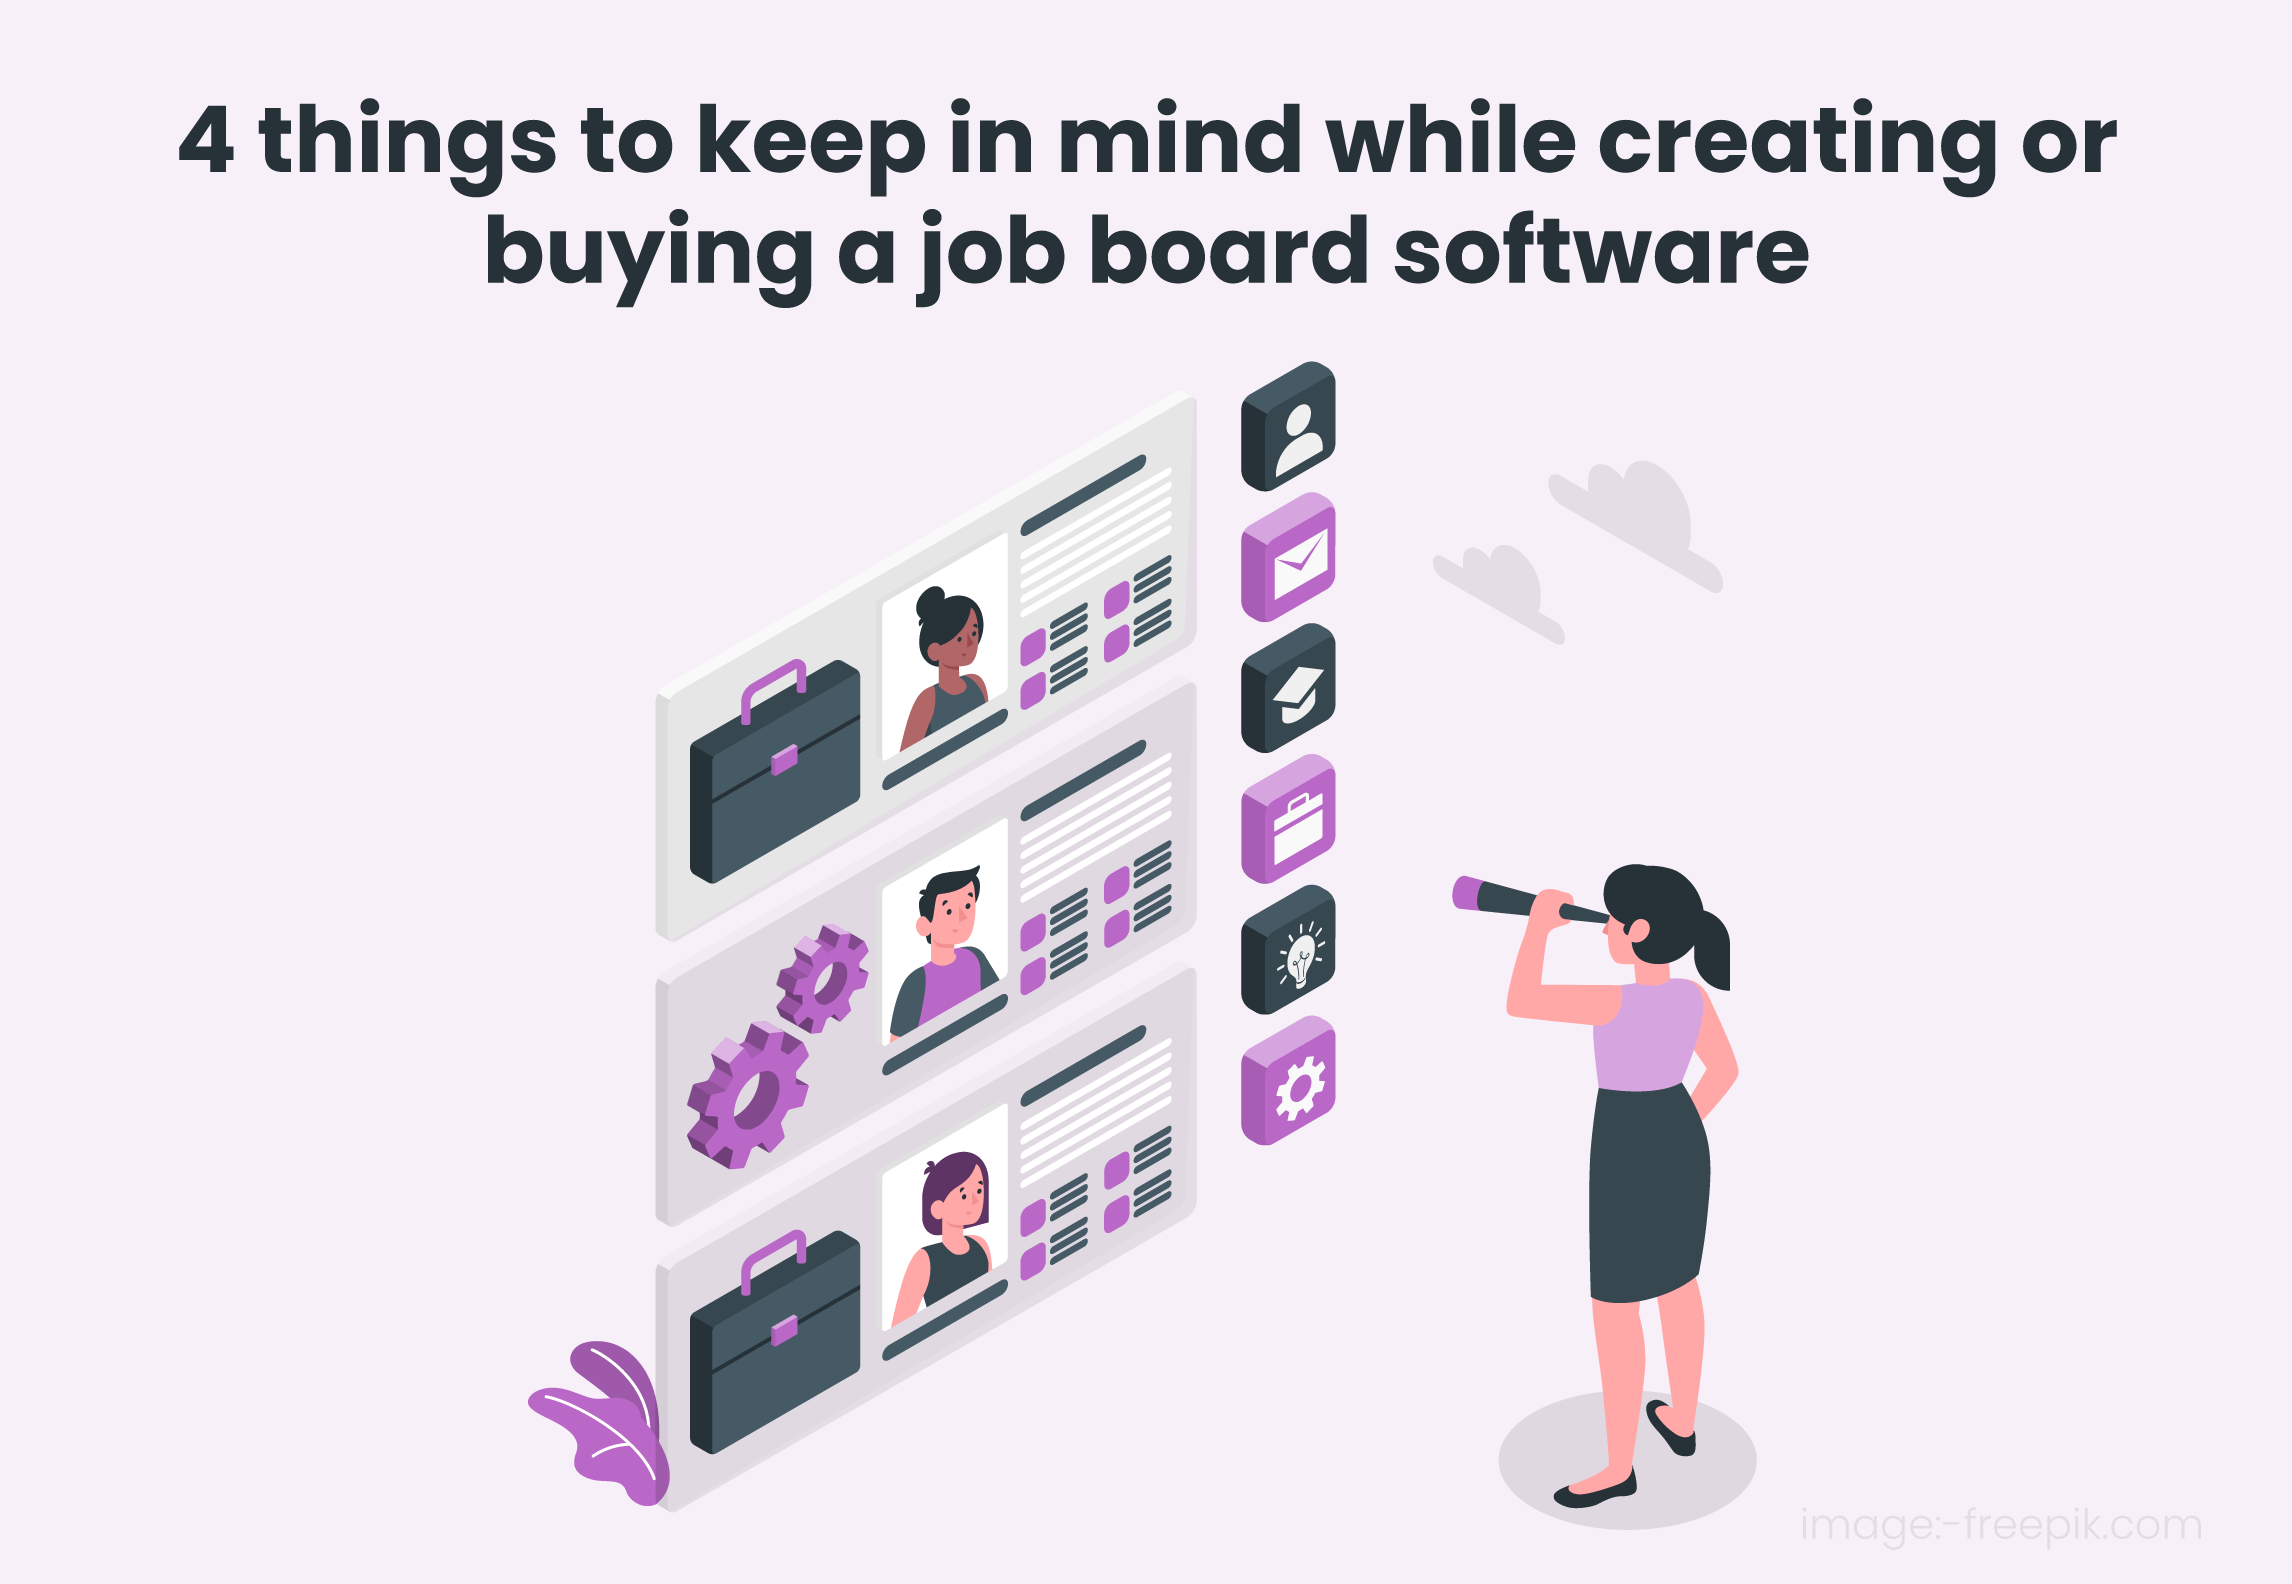 4 things to keep in mind while creating or buying a job board software min - Knovator